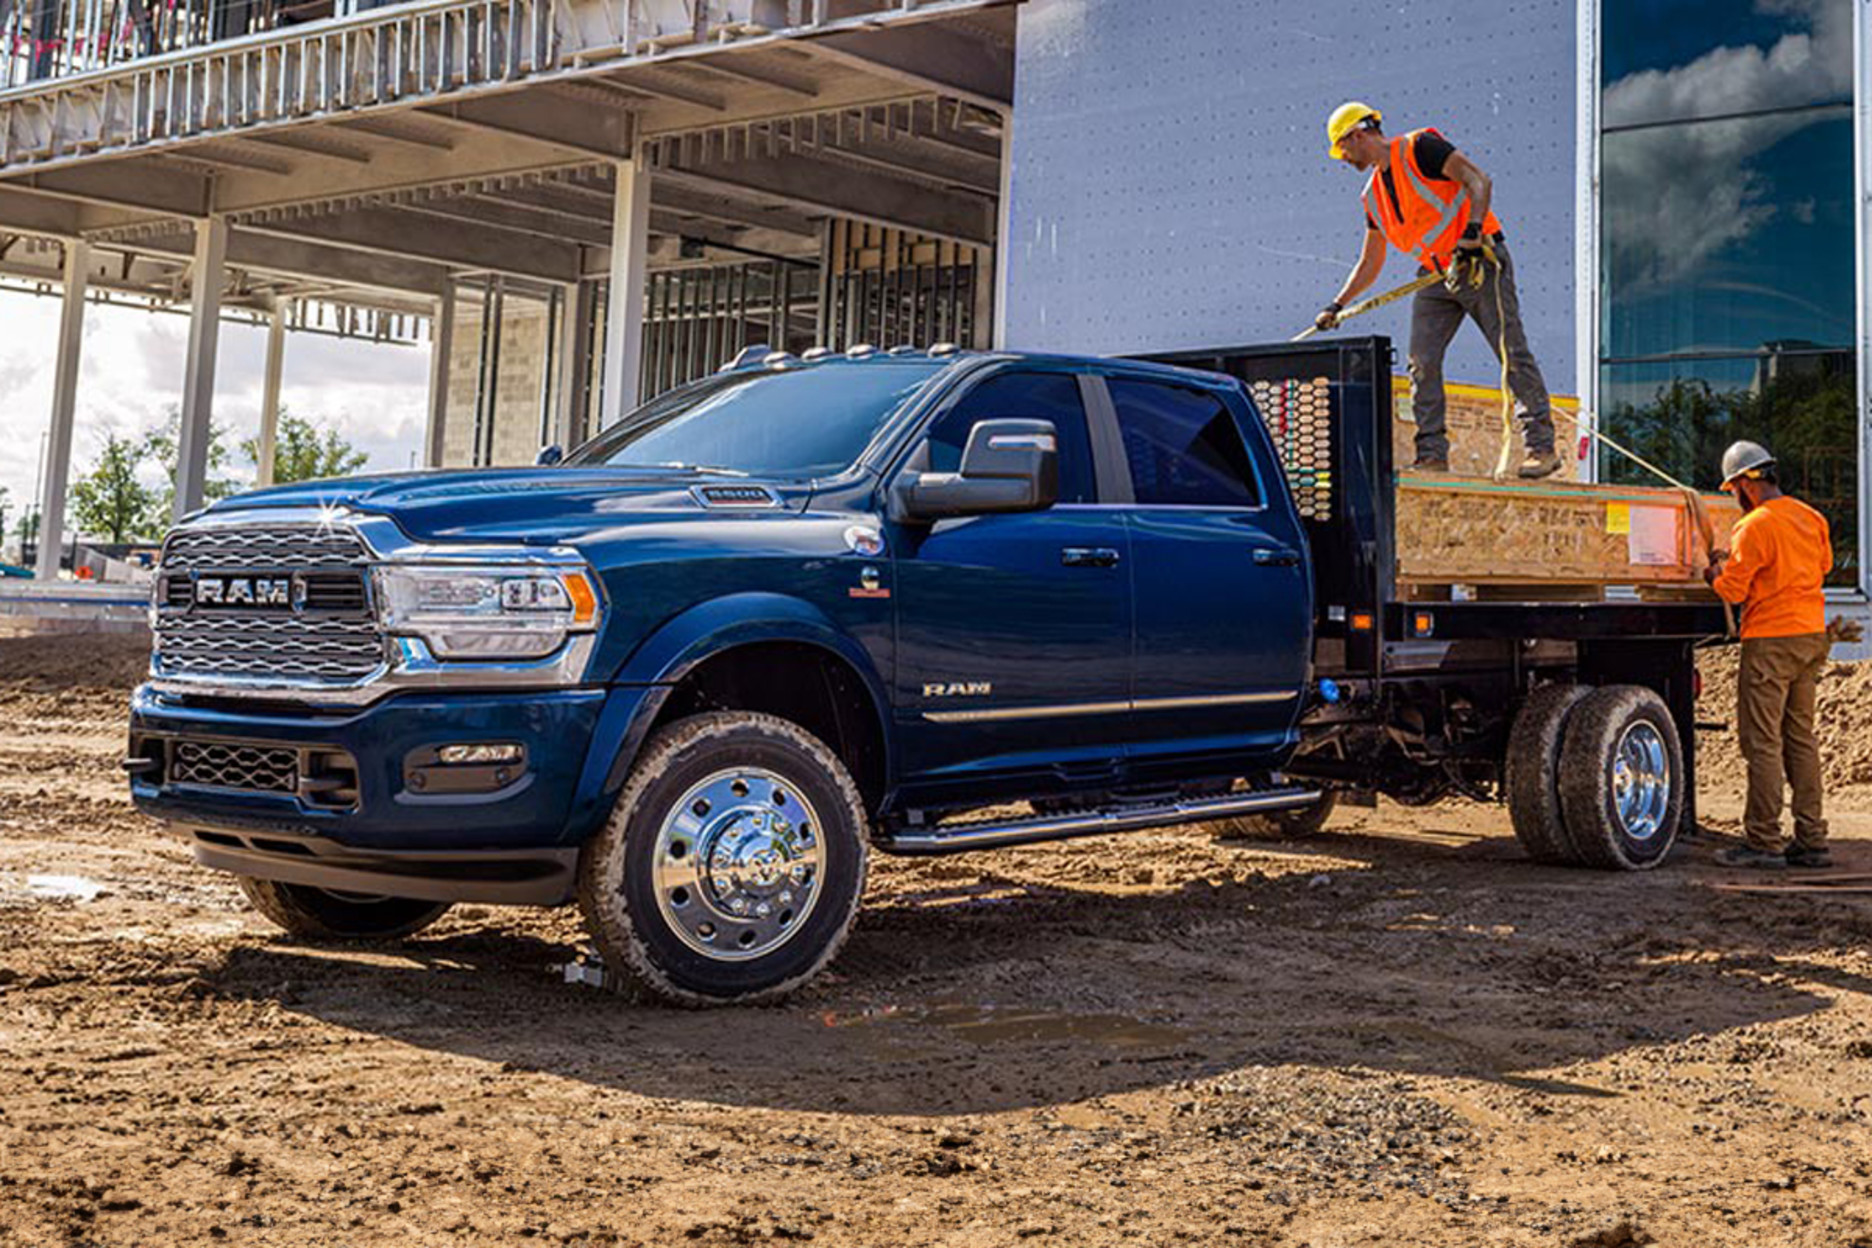 View of a blue 2024 Ram truck shown outside of a construction zone.